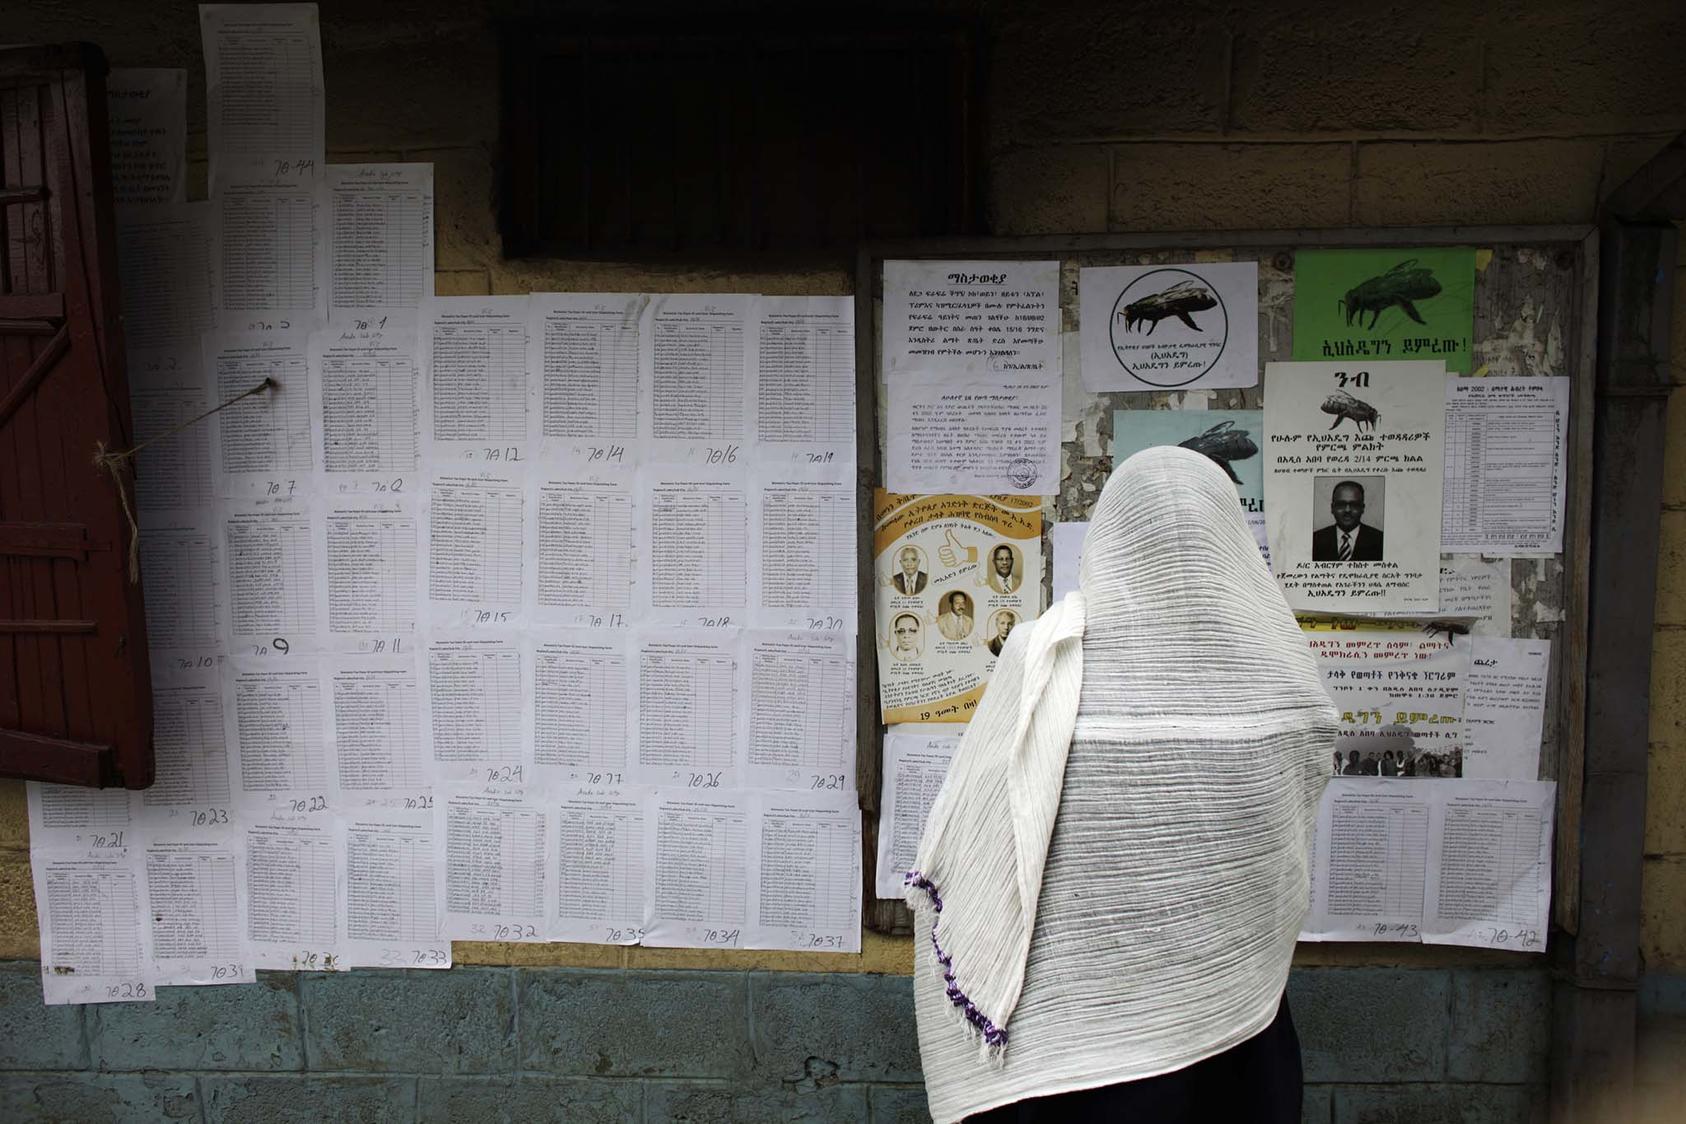 An Ethiopian woman reads election posters at a voter registration center, near the national palace in Addis Ababa, Ethiopia, May 19, 2010. (Ed Ou/The New York Times)